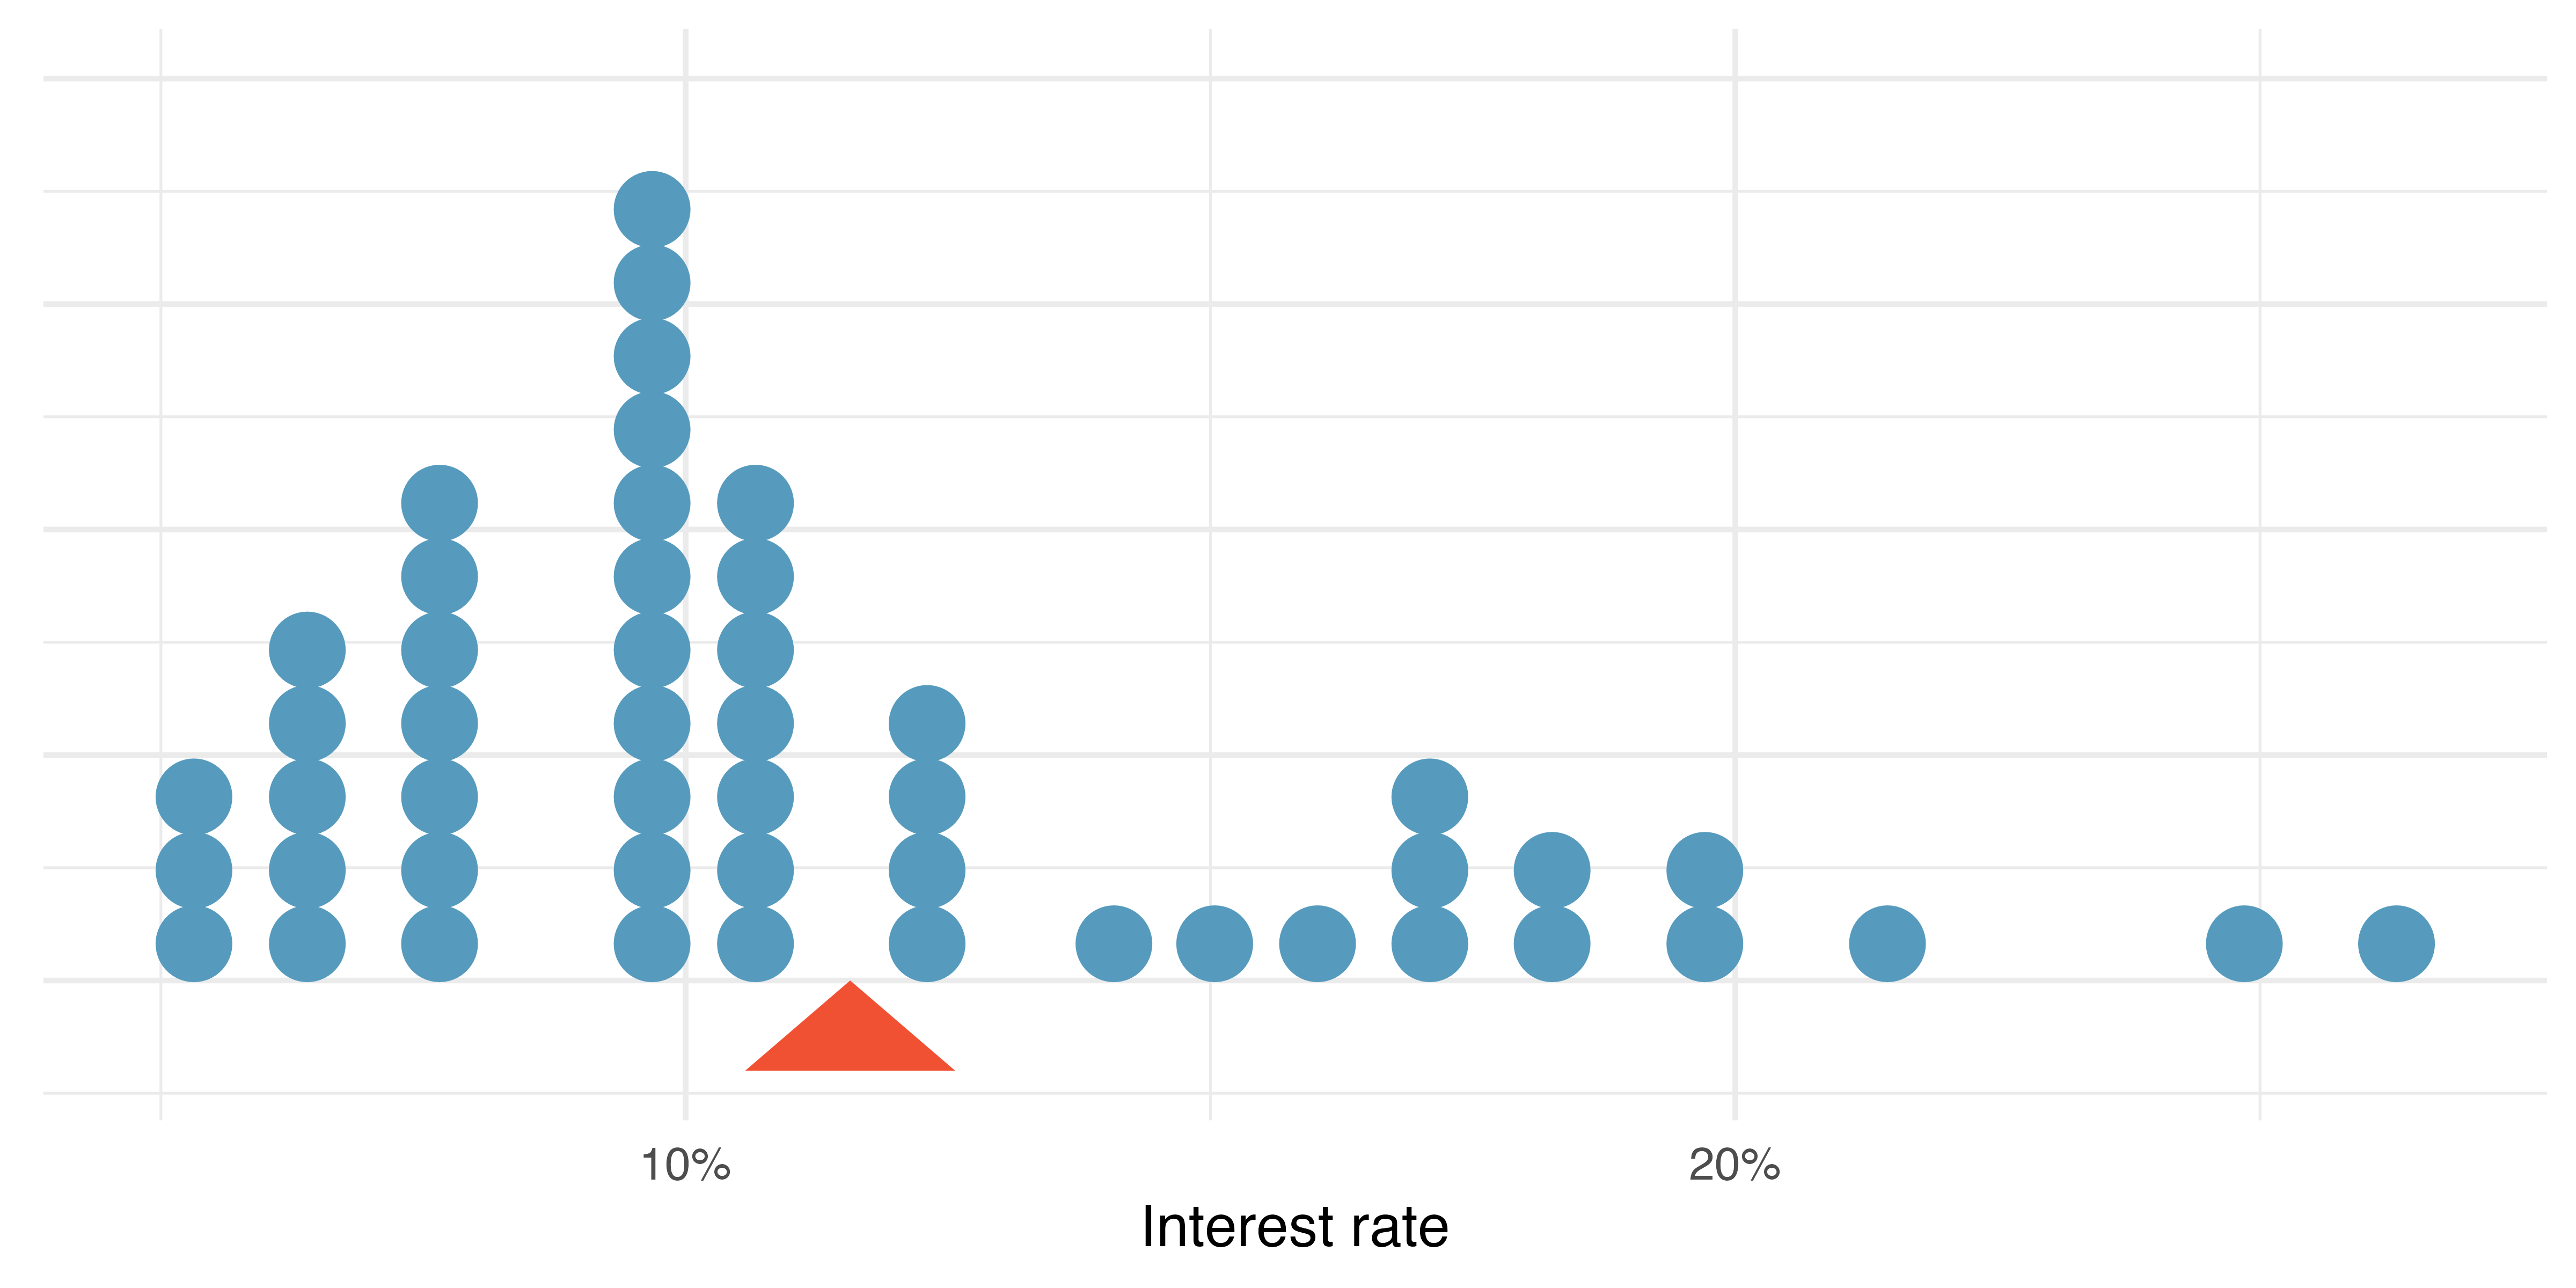 A dot plot of interest rate (ranging from about 5% to 25%). The distribution is right skewed, and the mean is shown at an interest rate of about 11%.